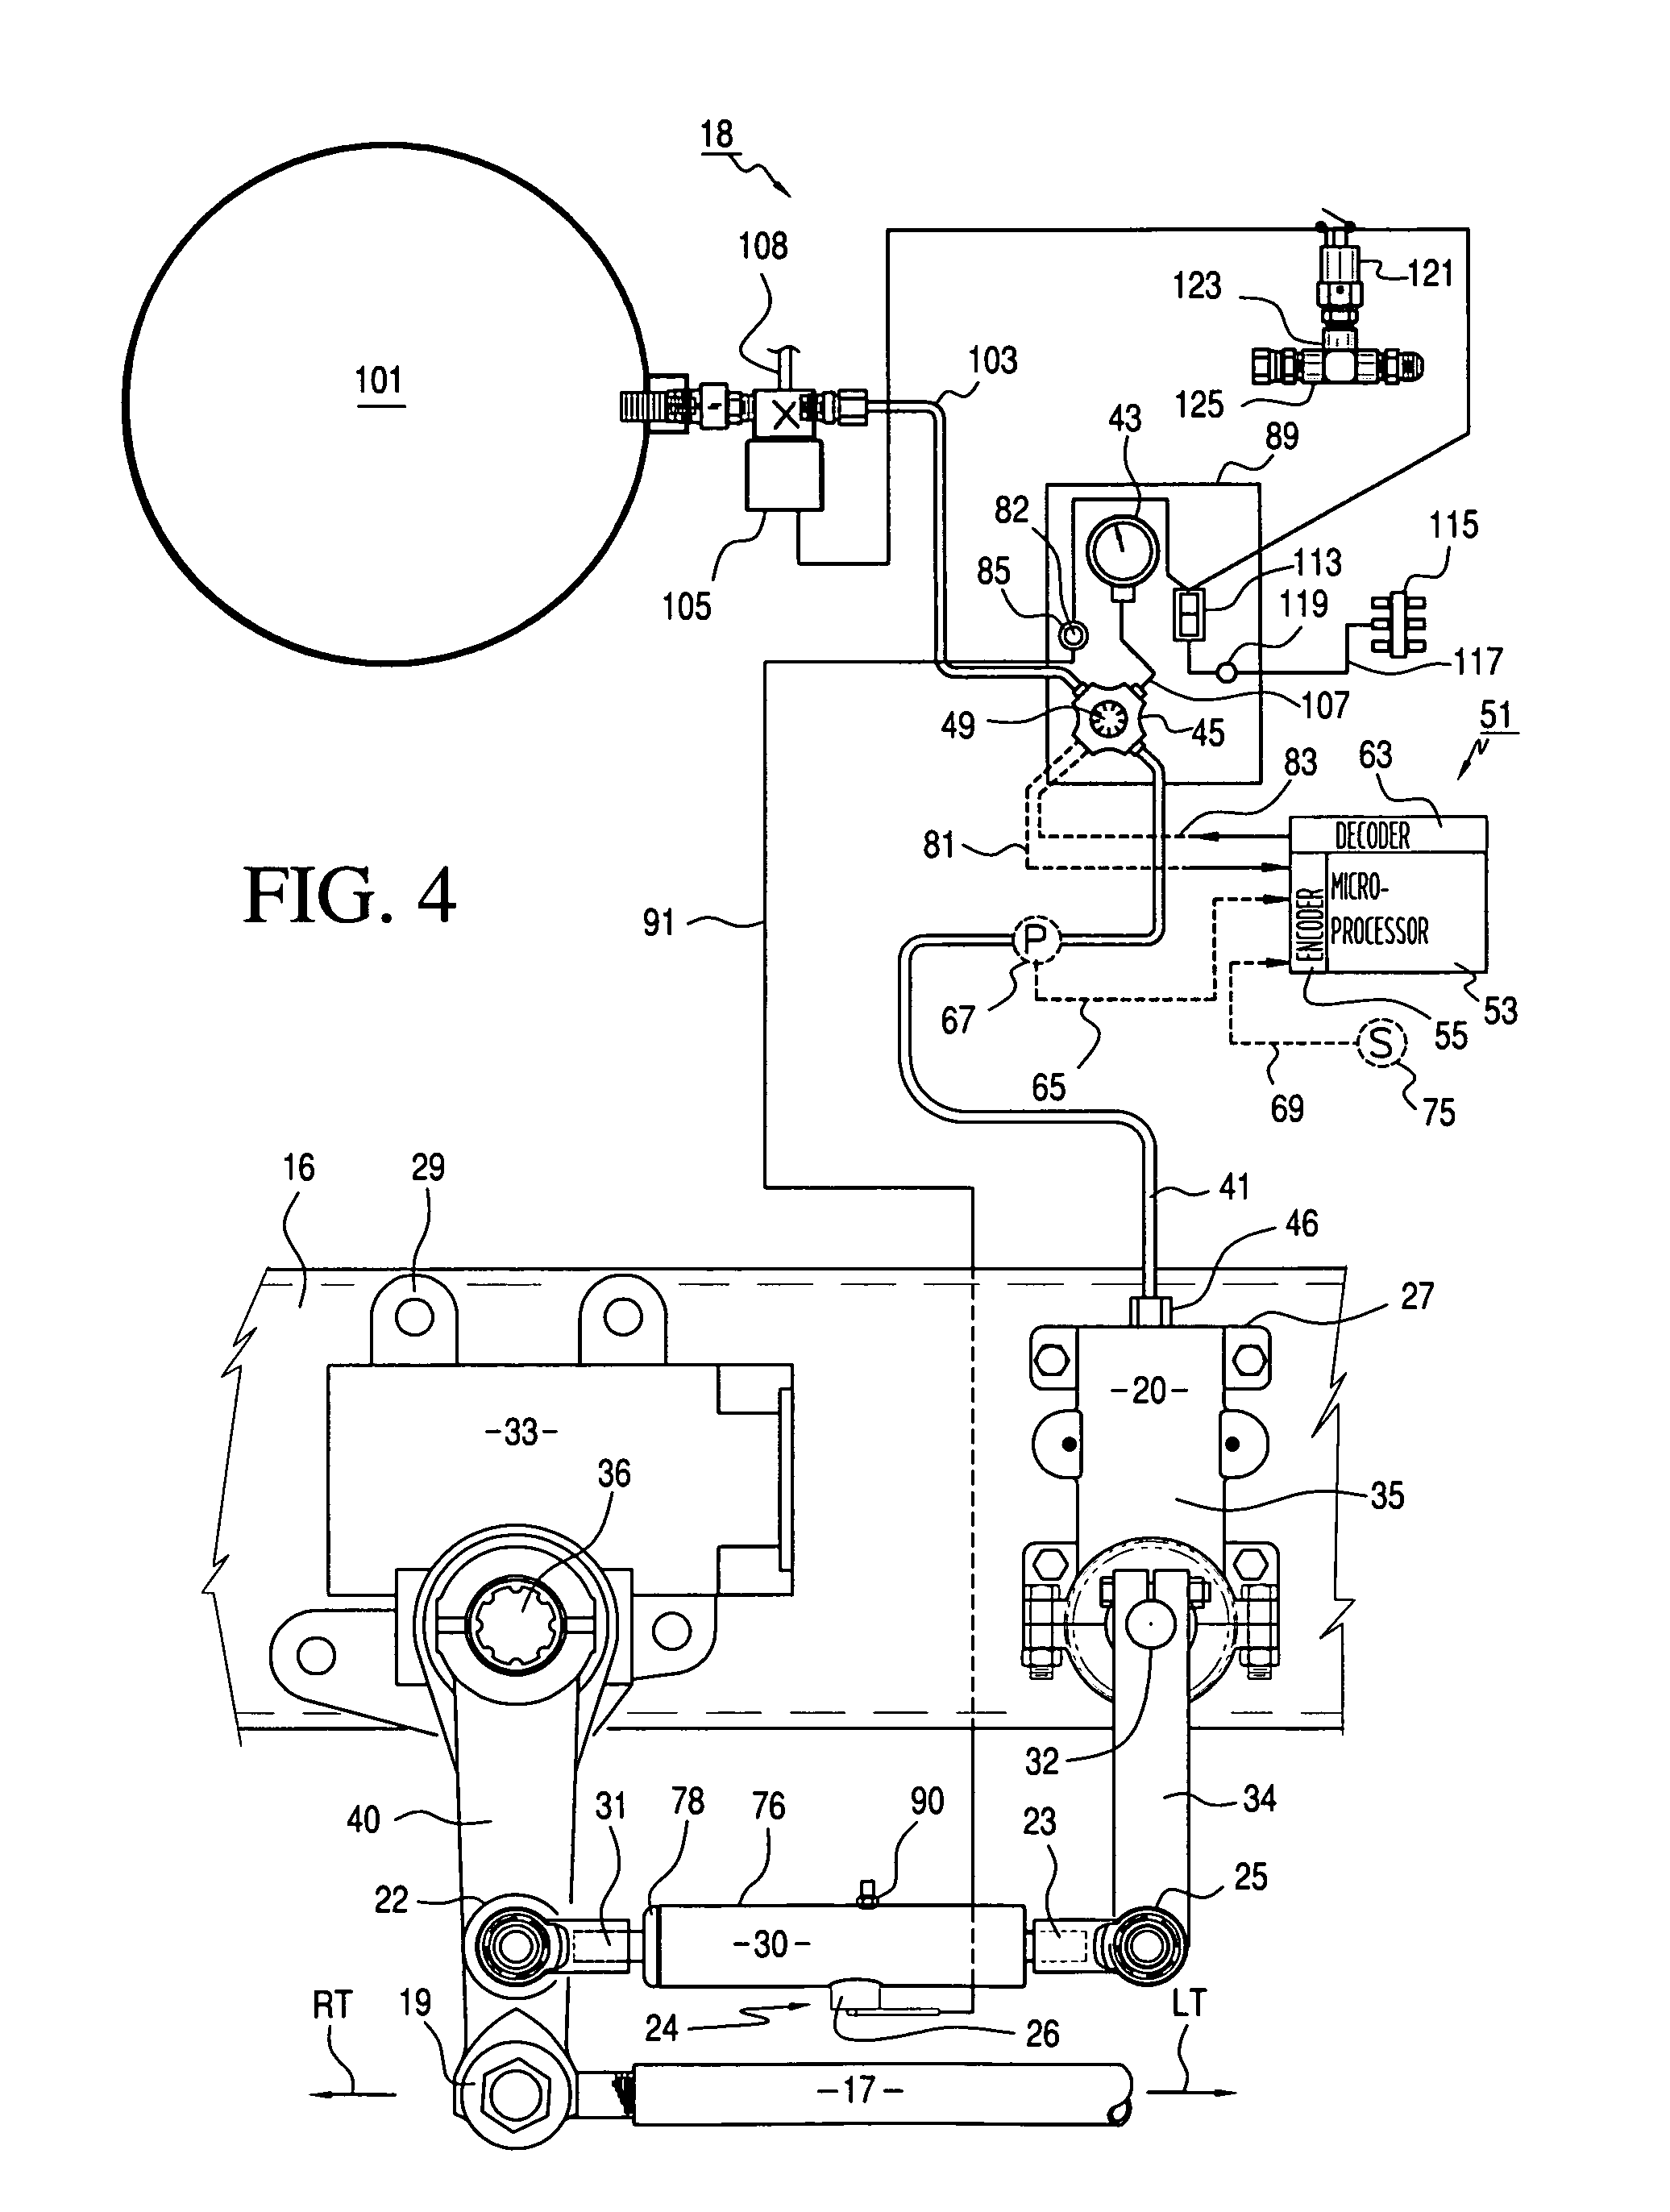 Steer wheel control system with stationary piston and reciprocating cylinder